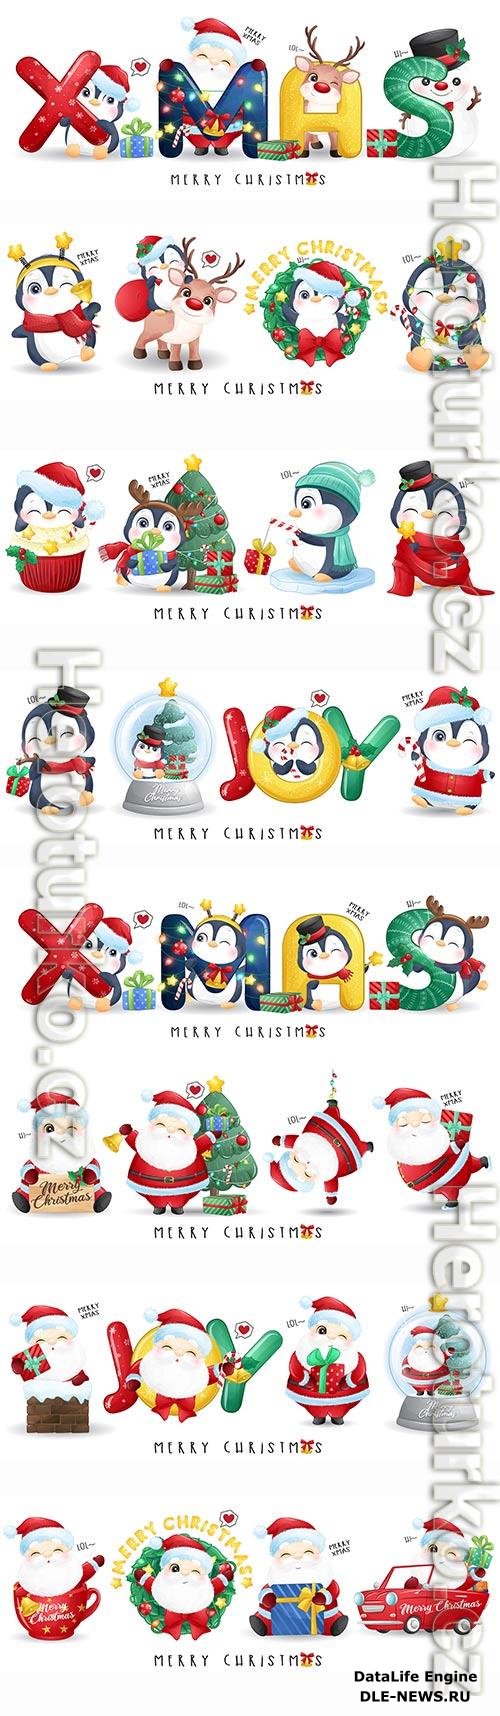 Santa claus and friends for merry christmas illustration premium vector